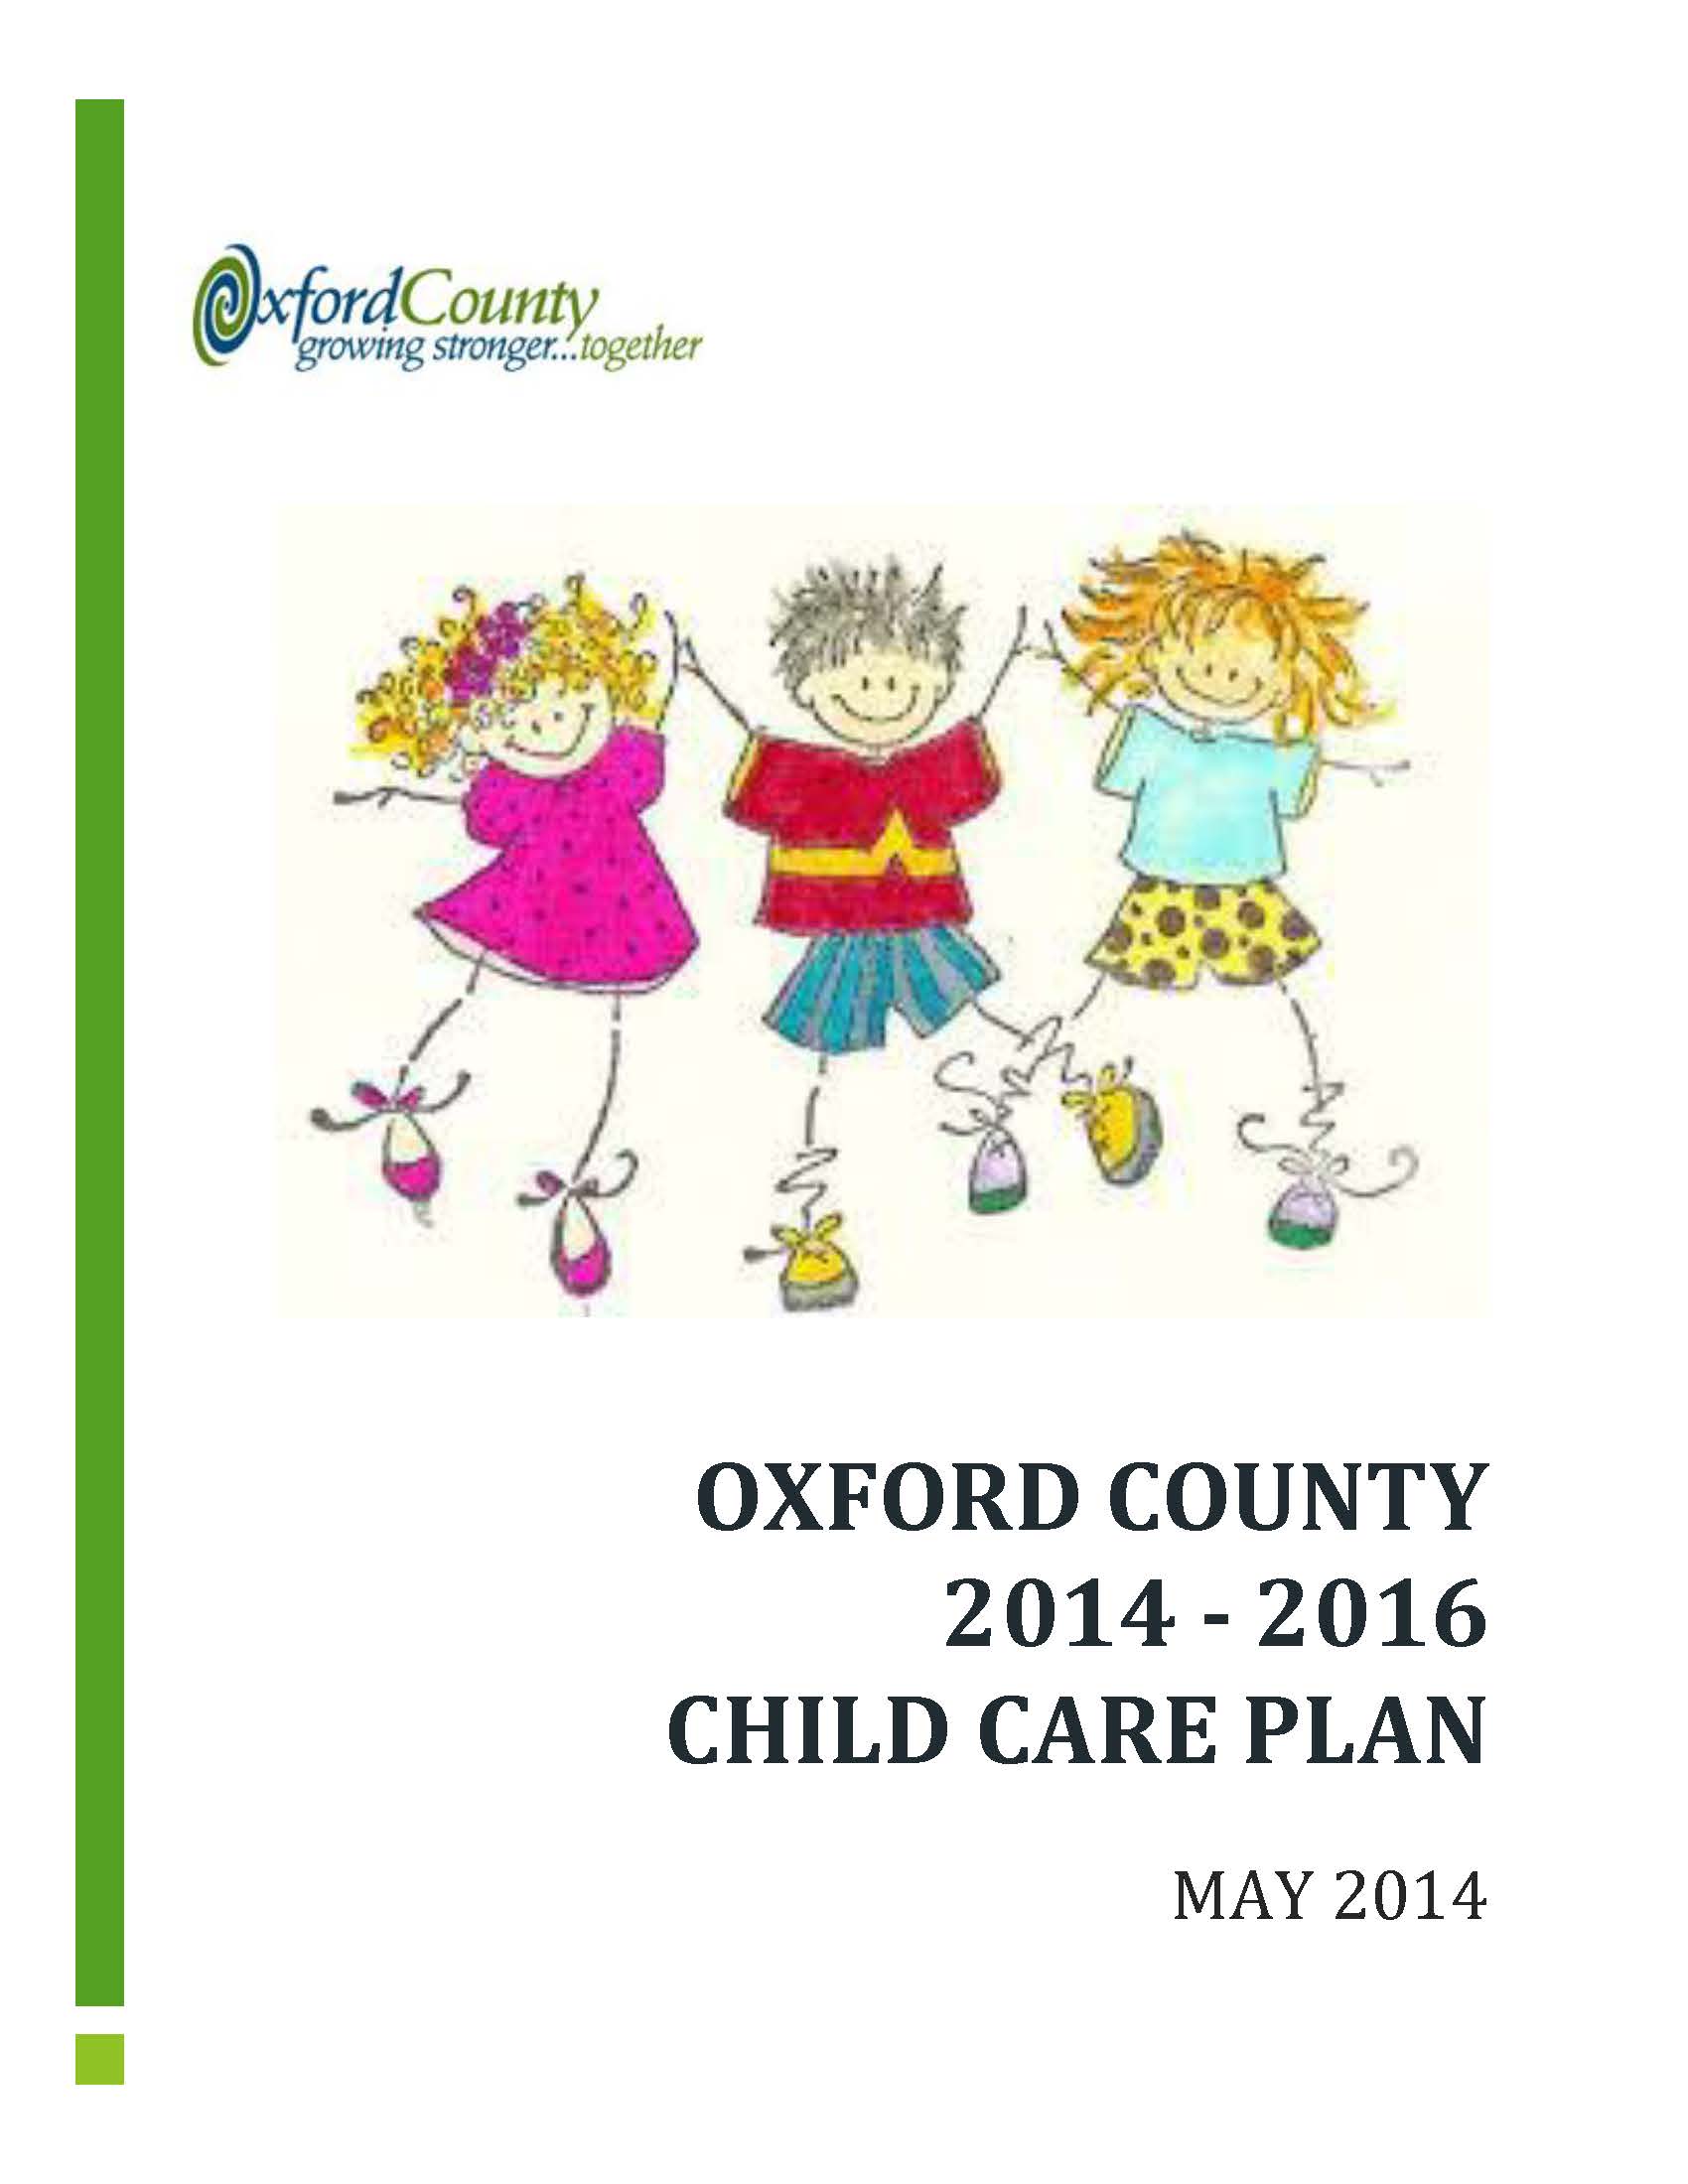 cover image of child care plan